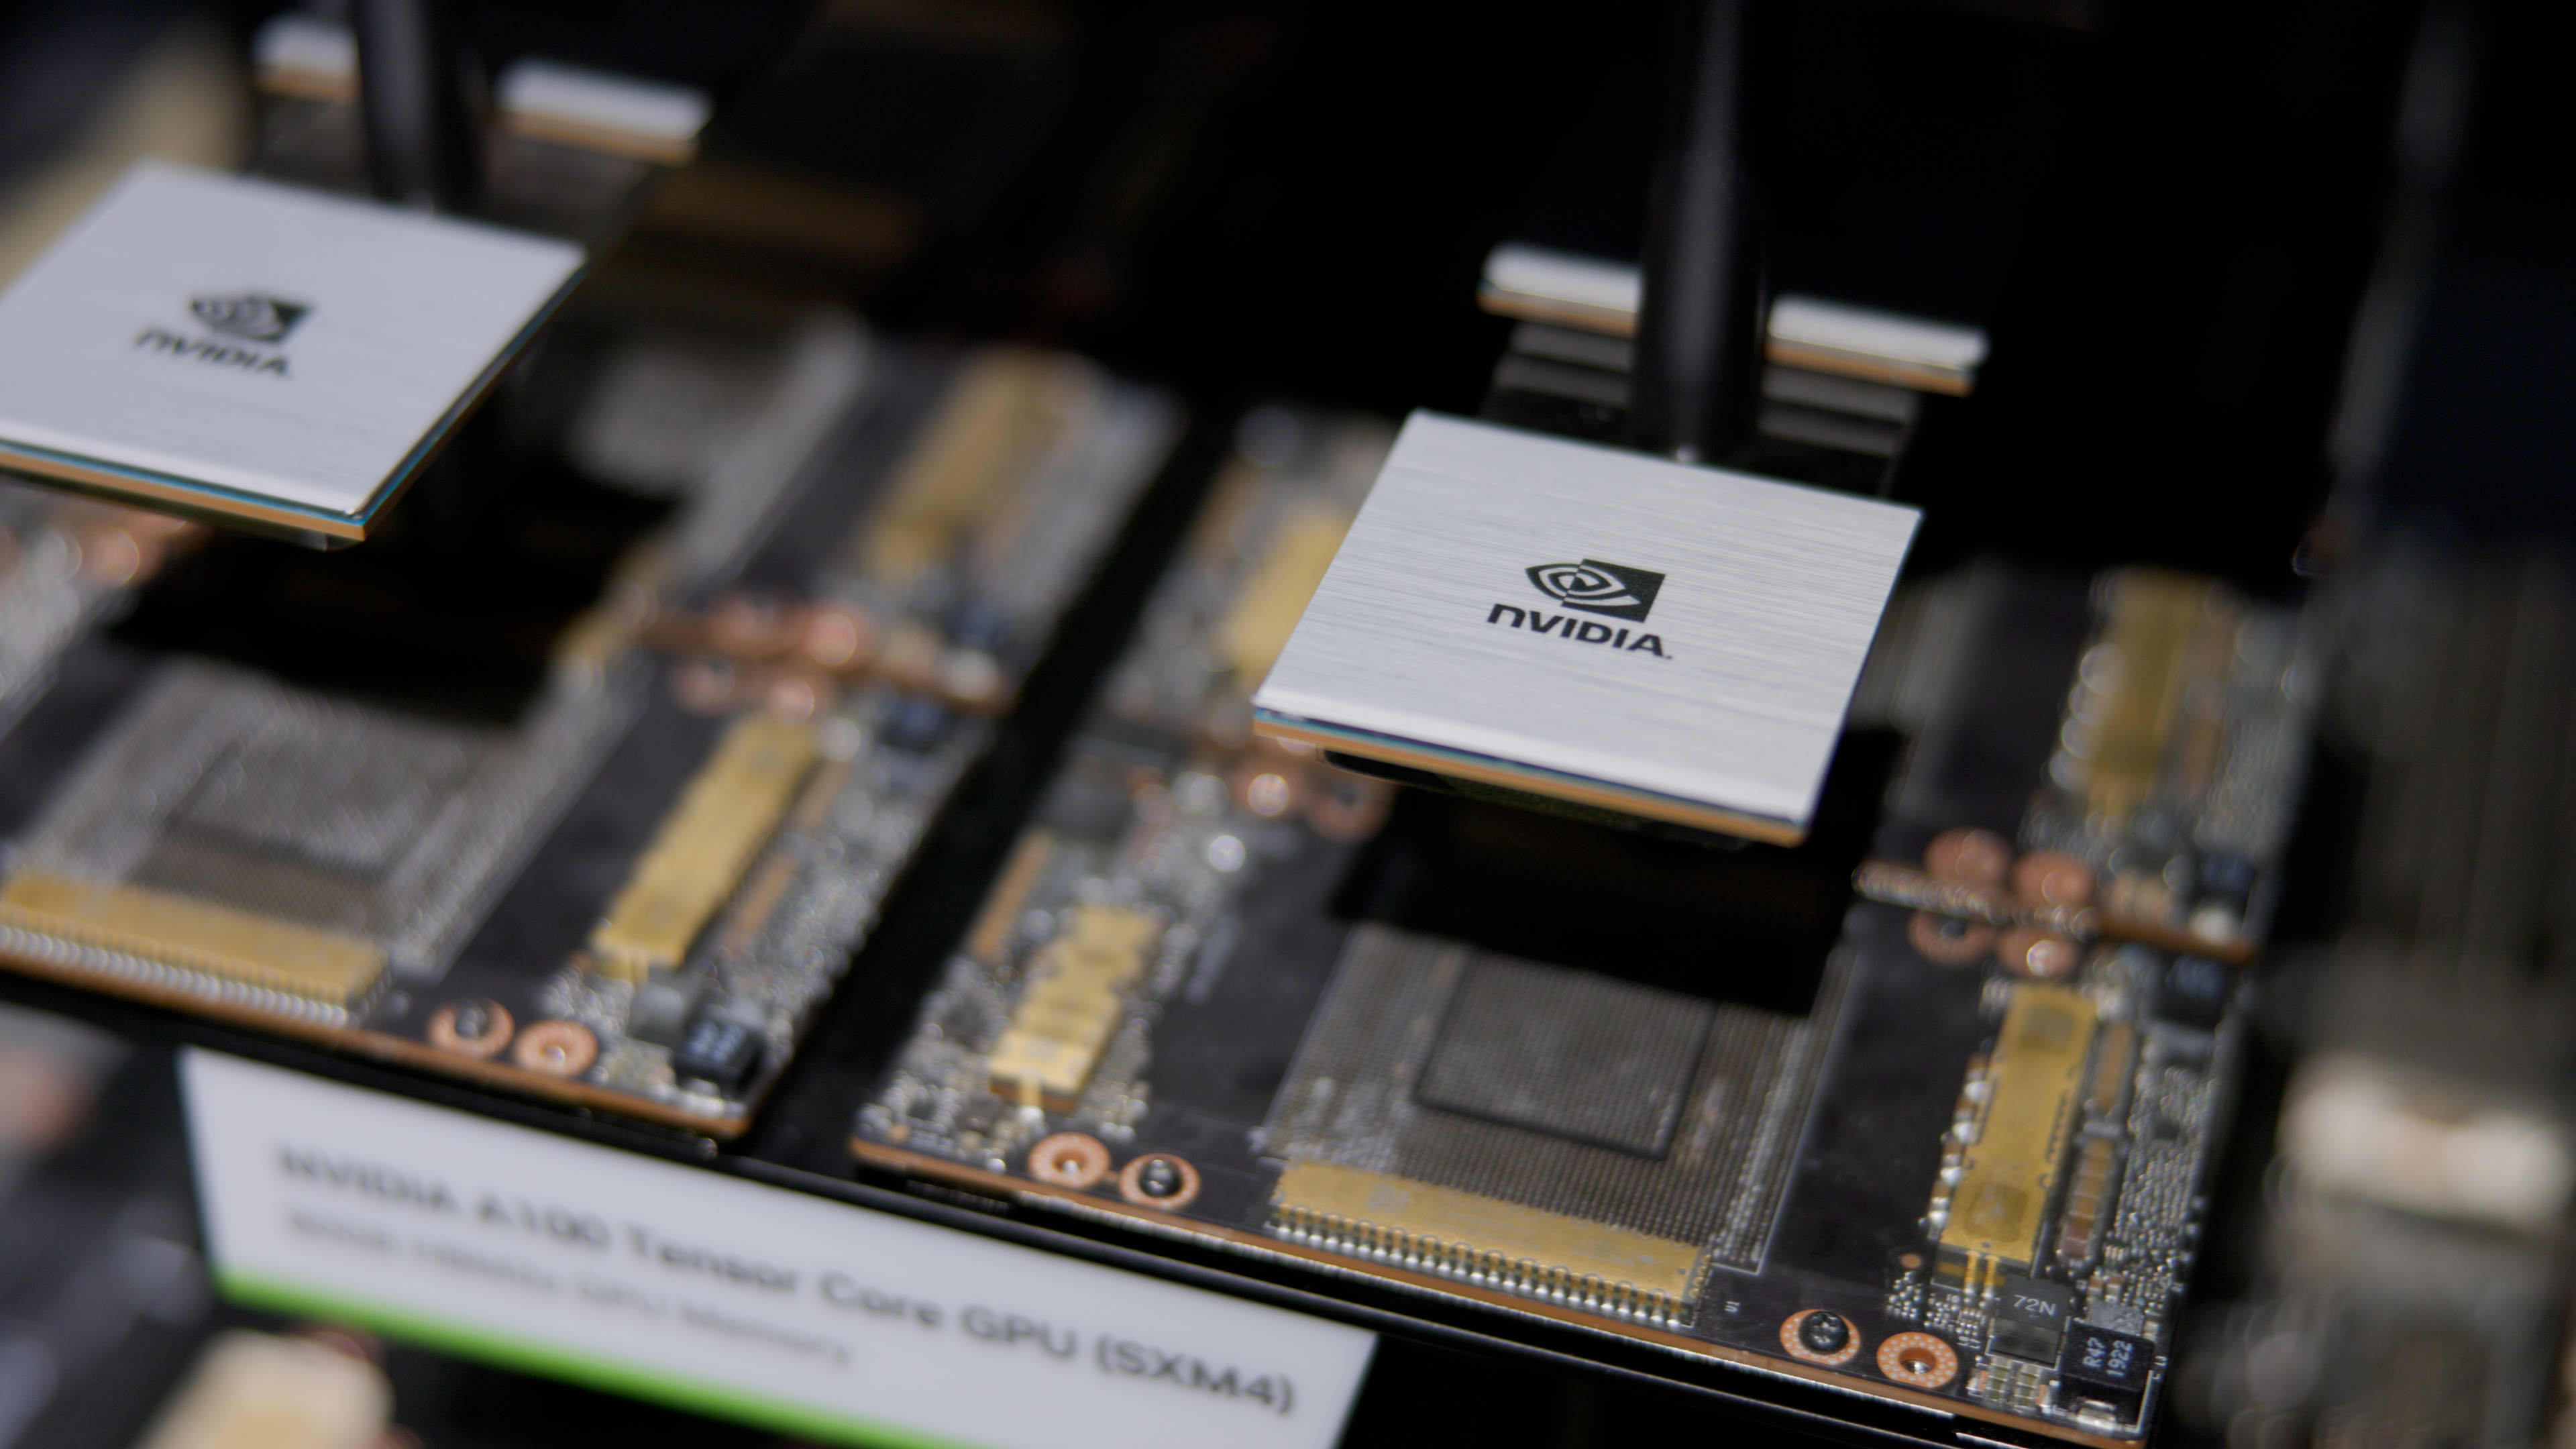 Is Nvidia's valuation justified? One bullish fund manager gives two reasons to own the stock